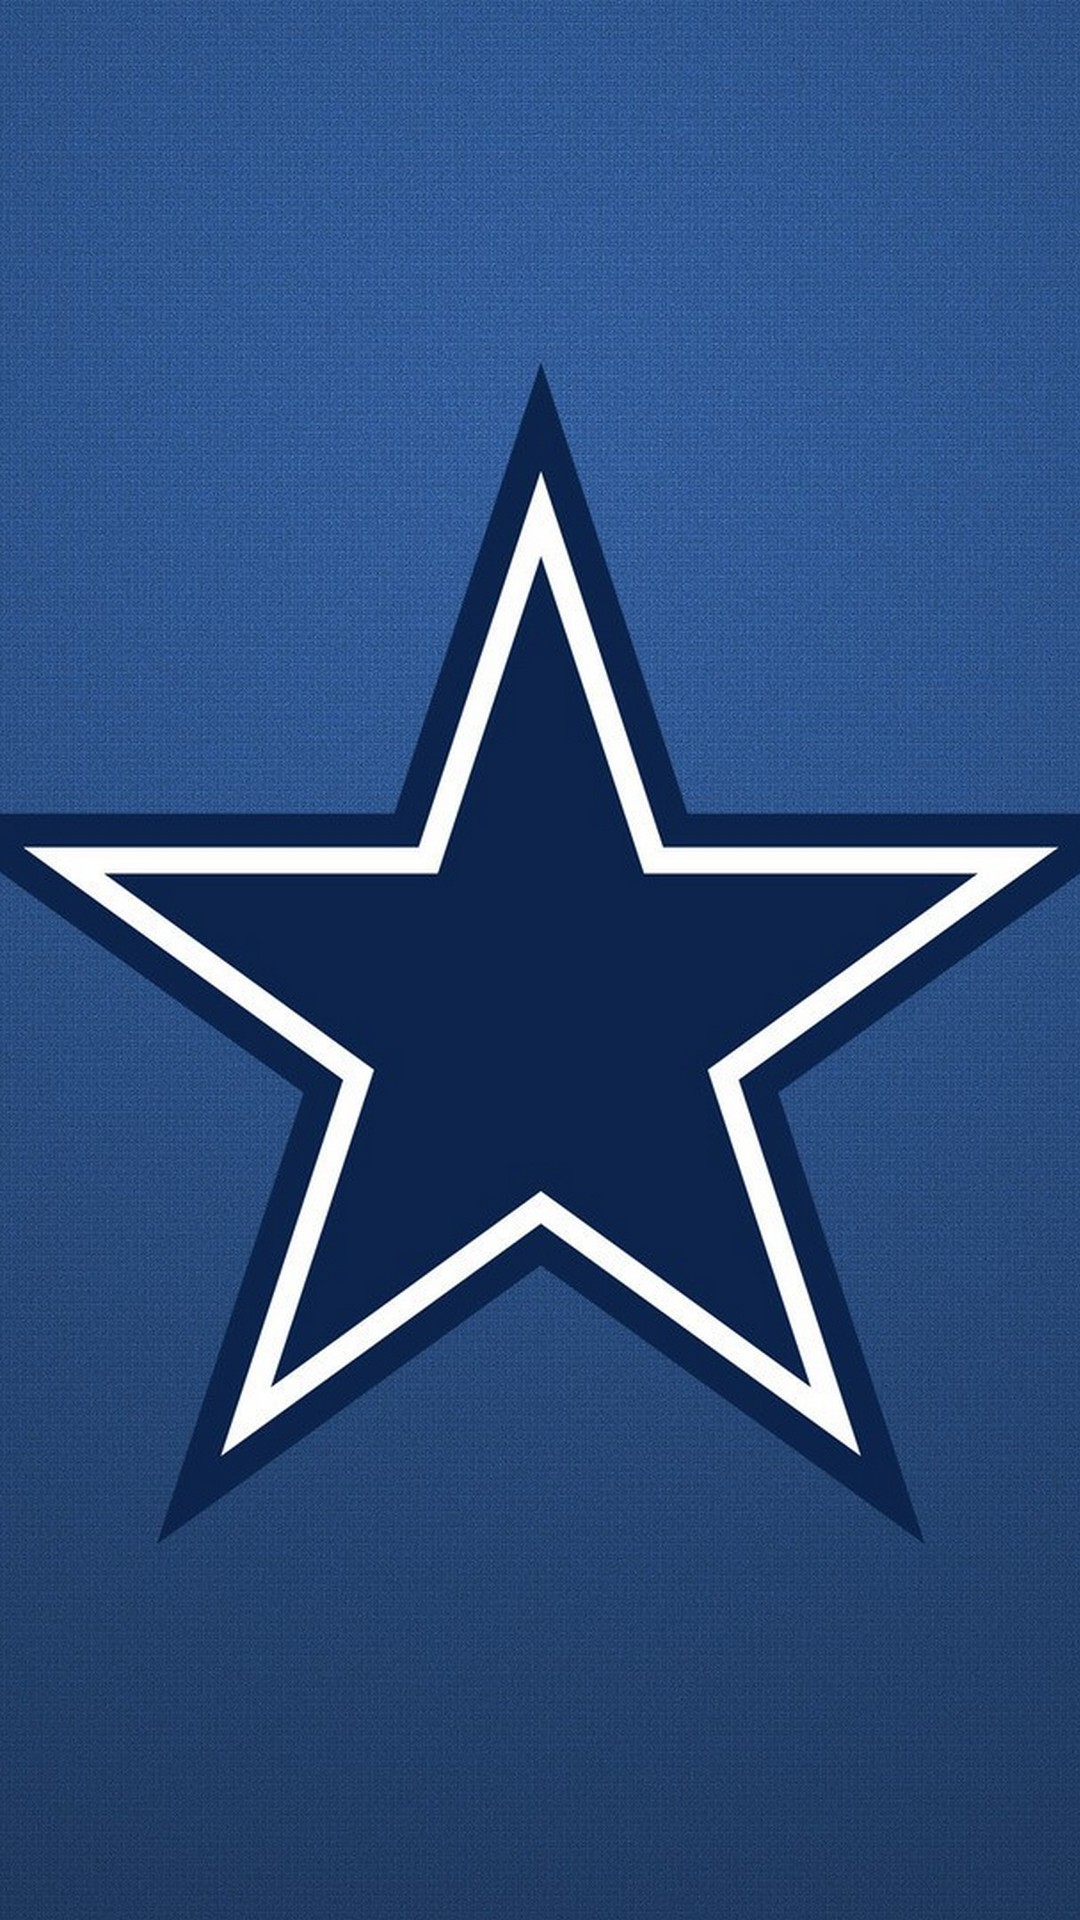 Screensaver iPhone Dallas Cowboys With high-resolution 1080X1920 pixel. Donwload and set as wallpaper for your iPhone X, iPhone XS home screen backgrounds, XS Max, XR, iPhone8 lock screen wallpaper, iPhone 7, 6, SE, and other mobile devices